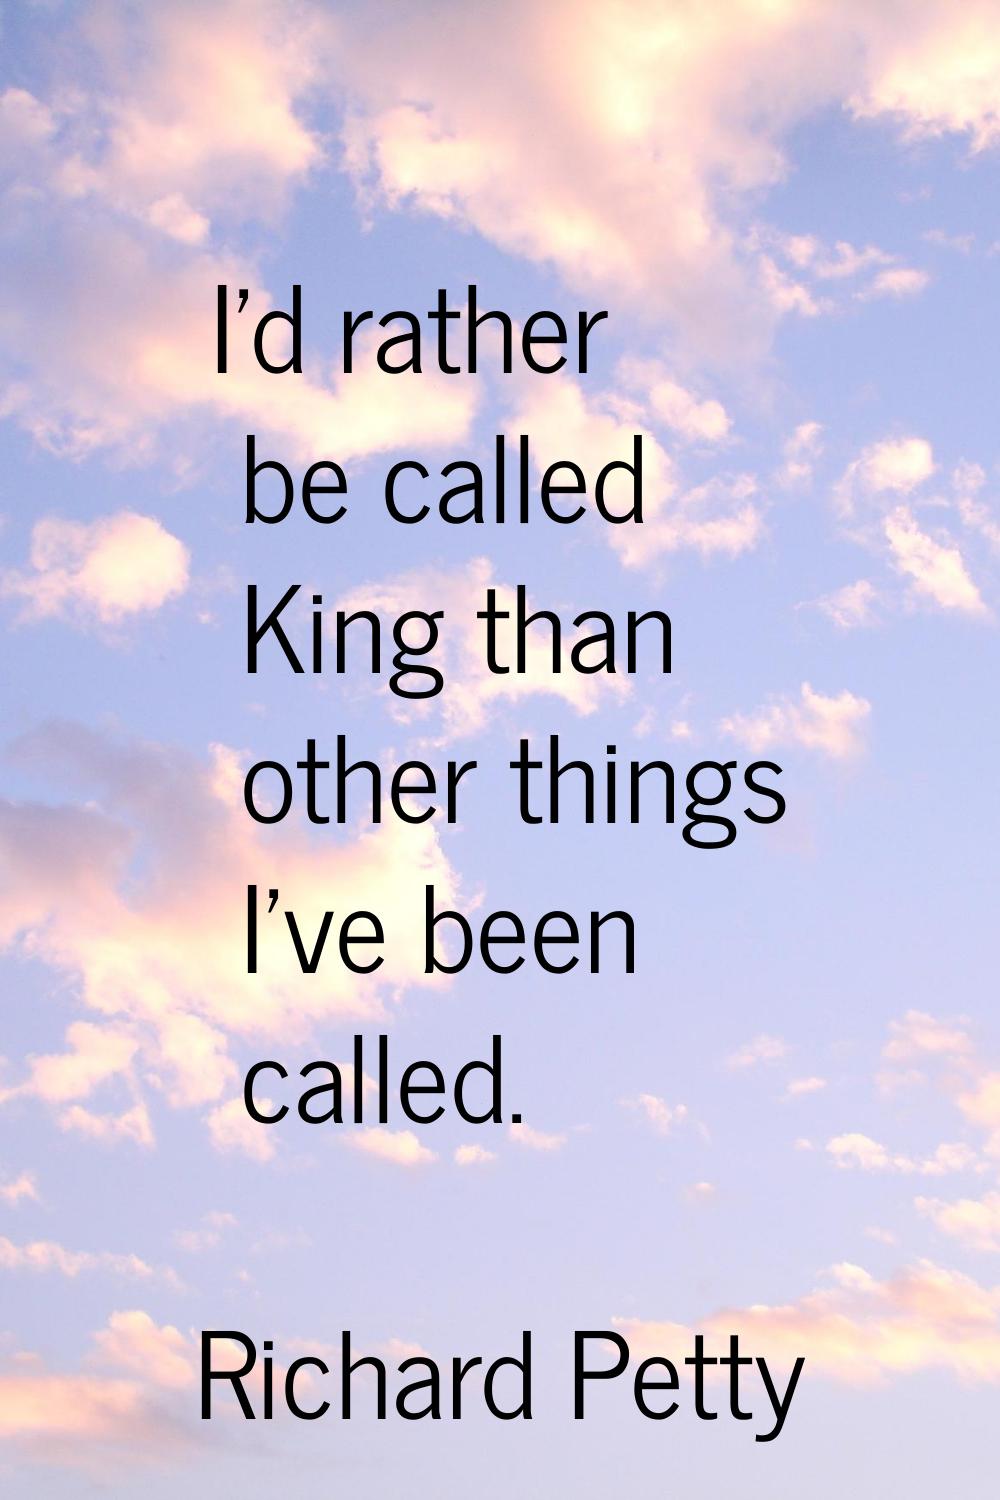 I'd rather be called King than other things I've been called.